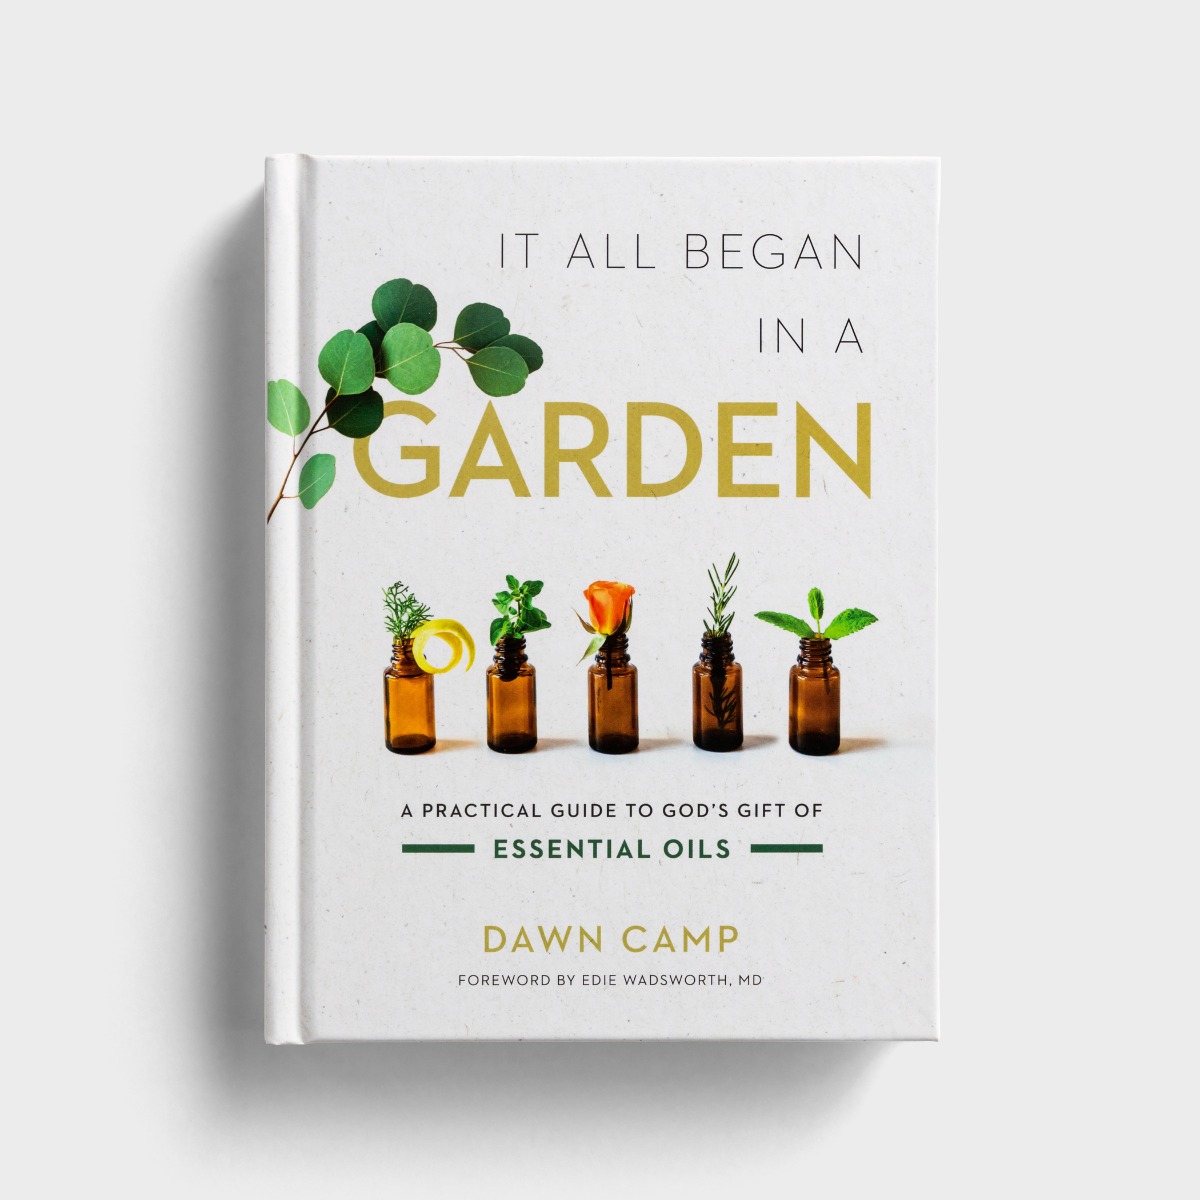 Dawn Camp - It All Began In The Garden: A Practical Guide to God's Gift of Essential Oils